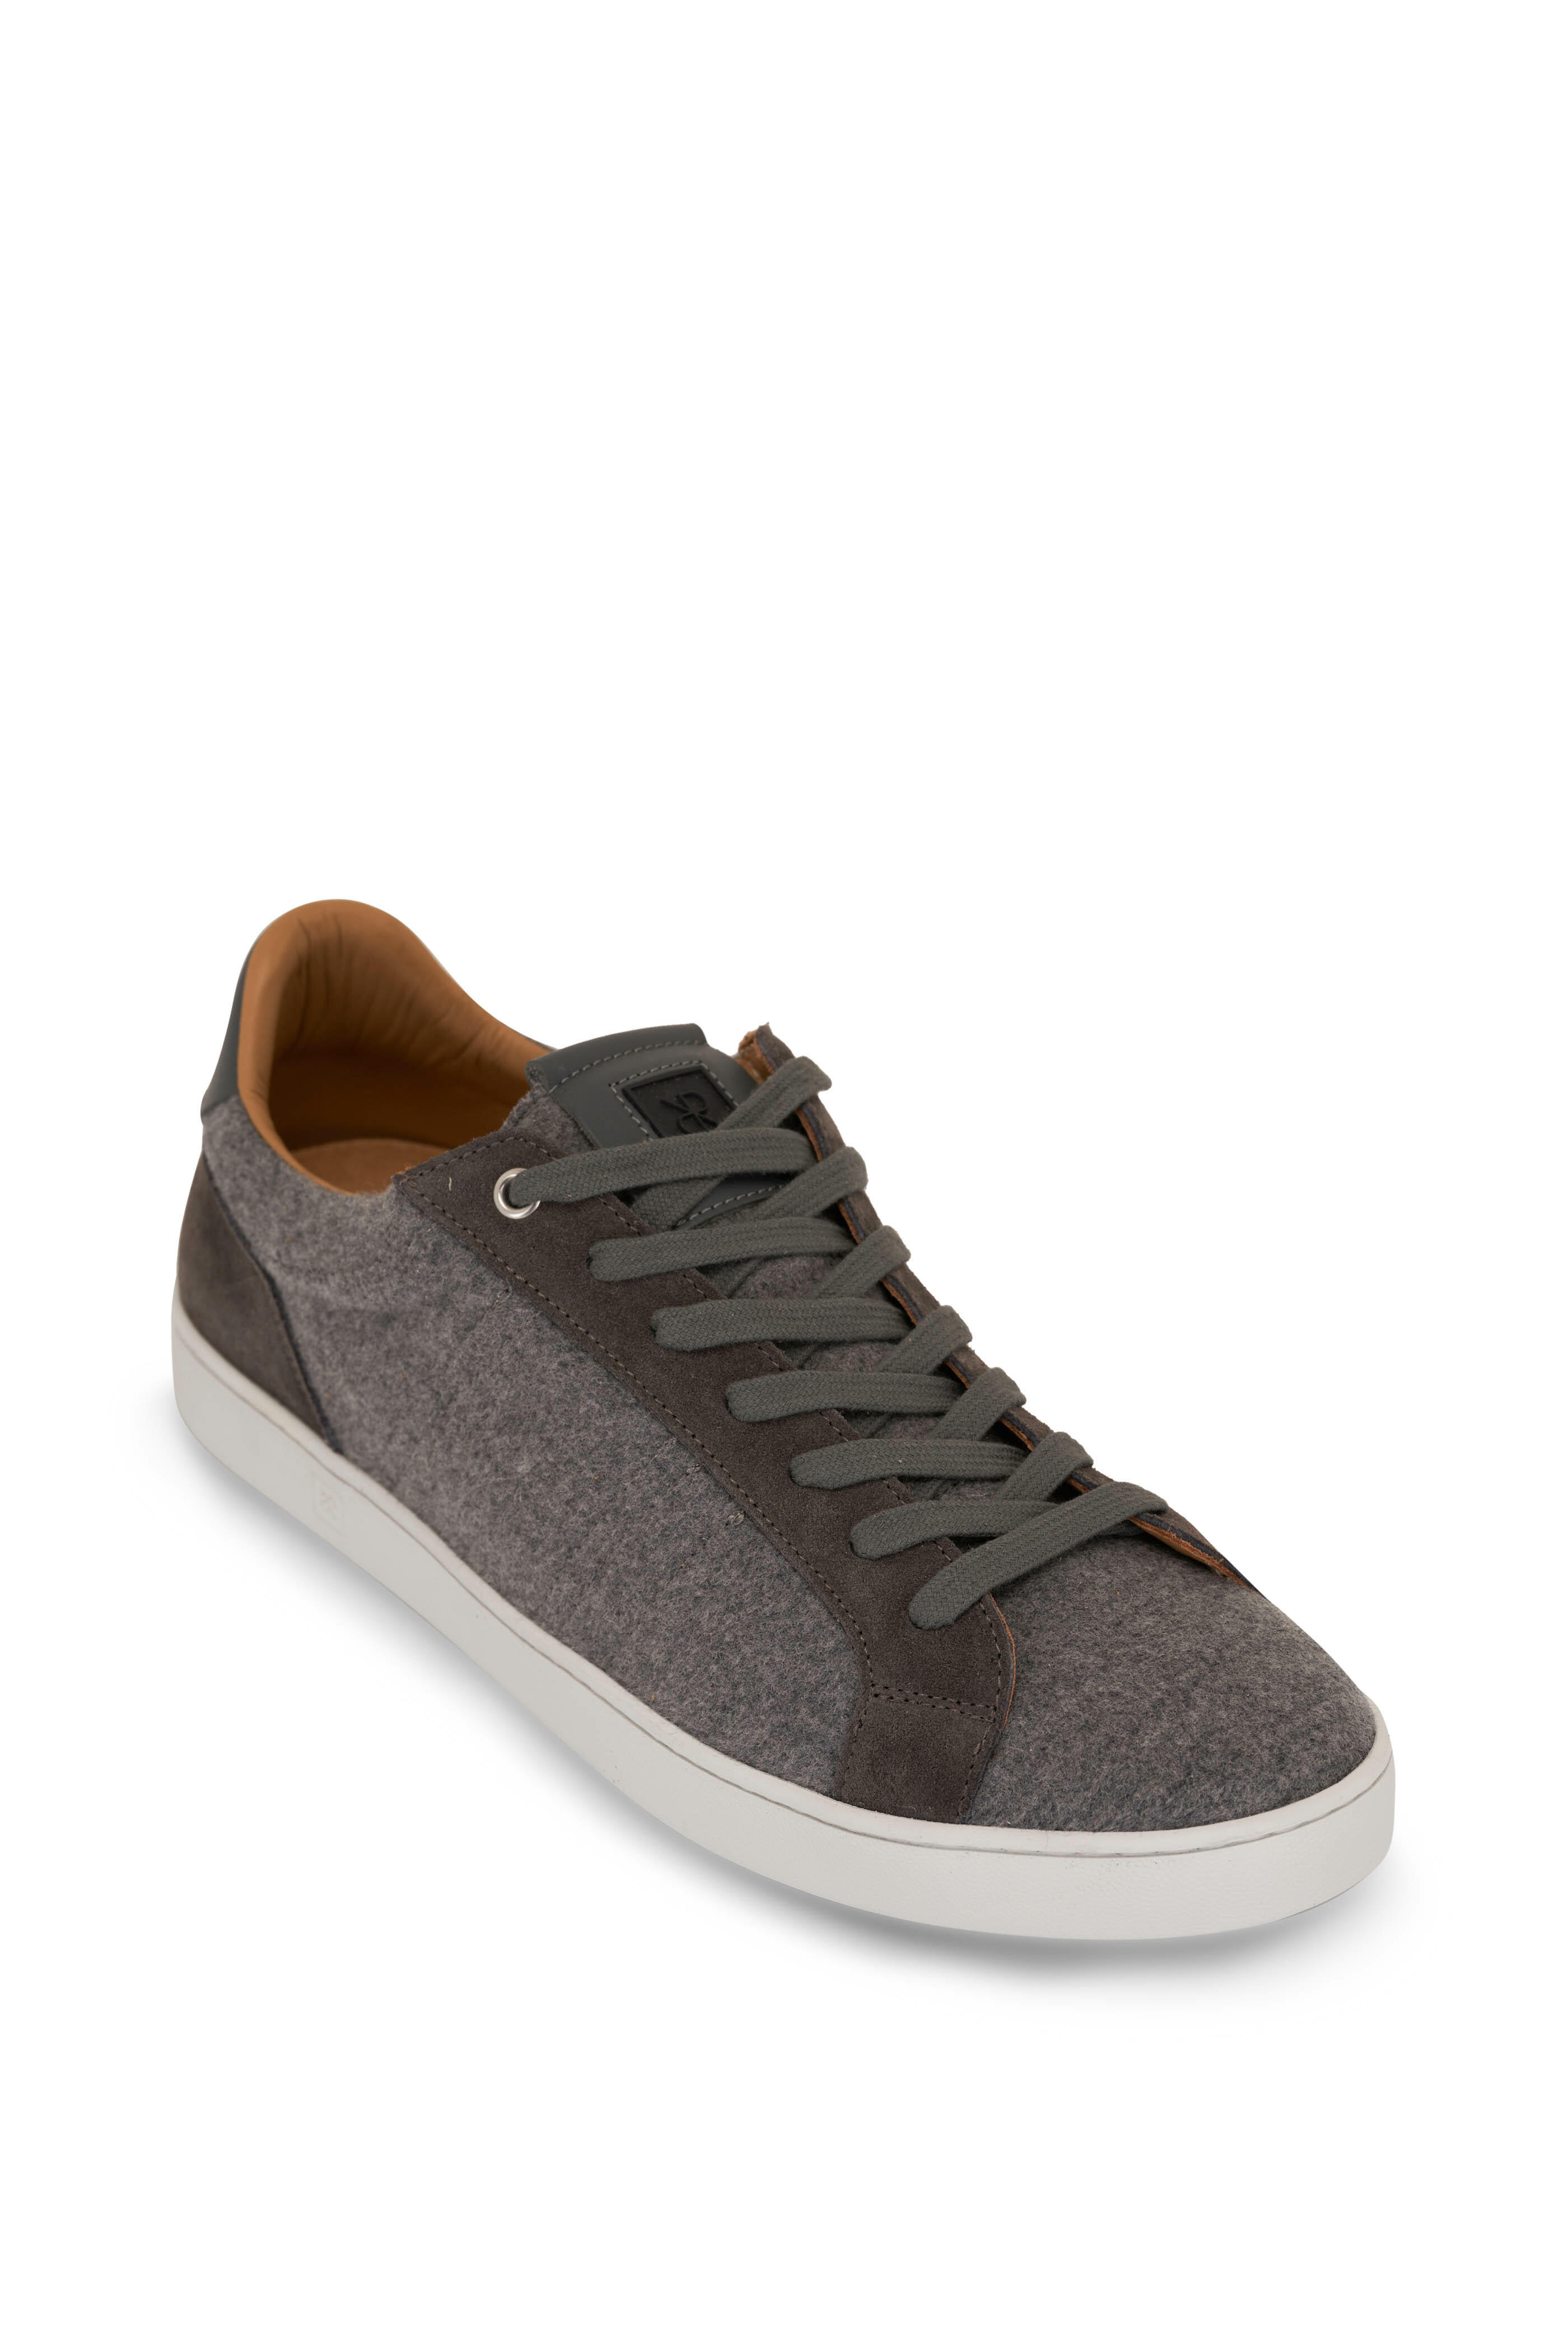 Rubirosa - Odile Gray Wool & Suede Sneaker | Mitchell Stores